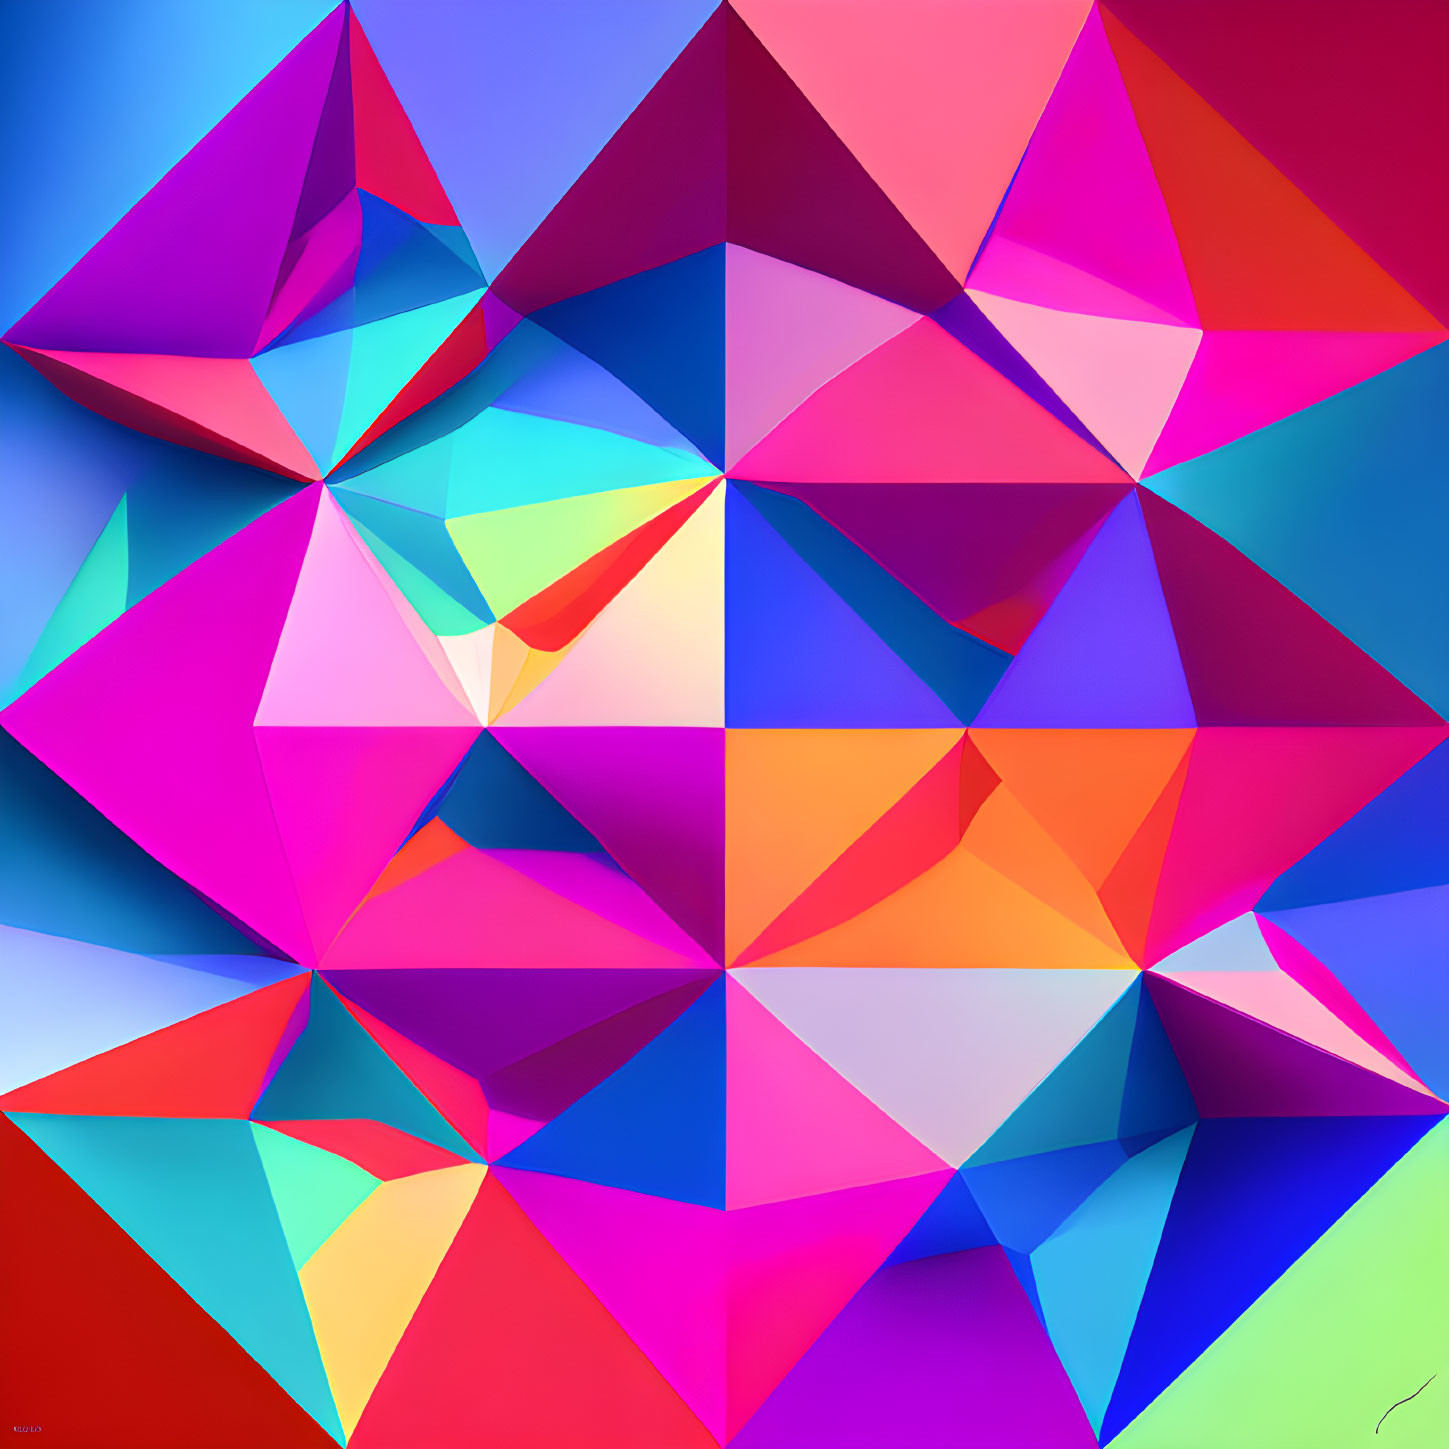 Penrose's impossible triangle